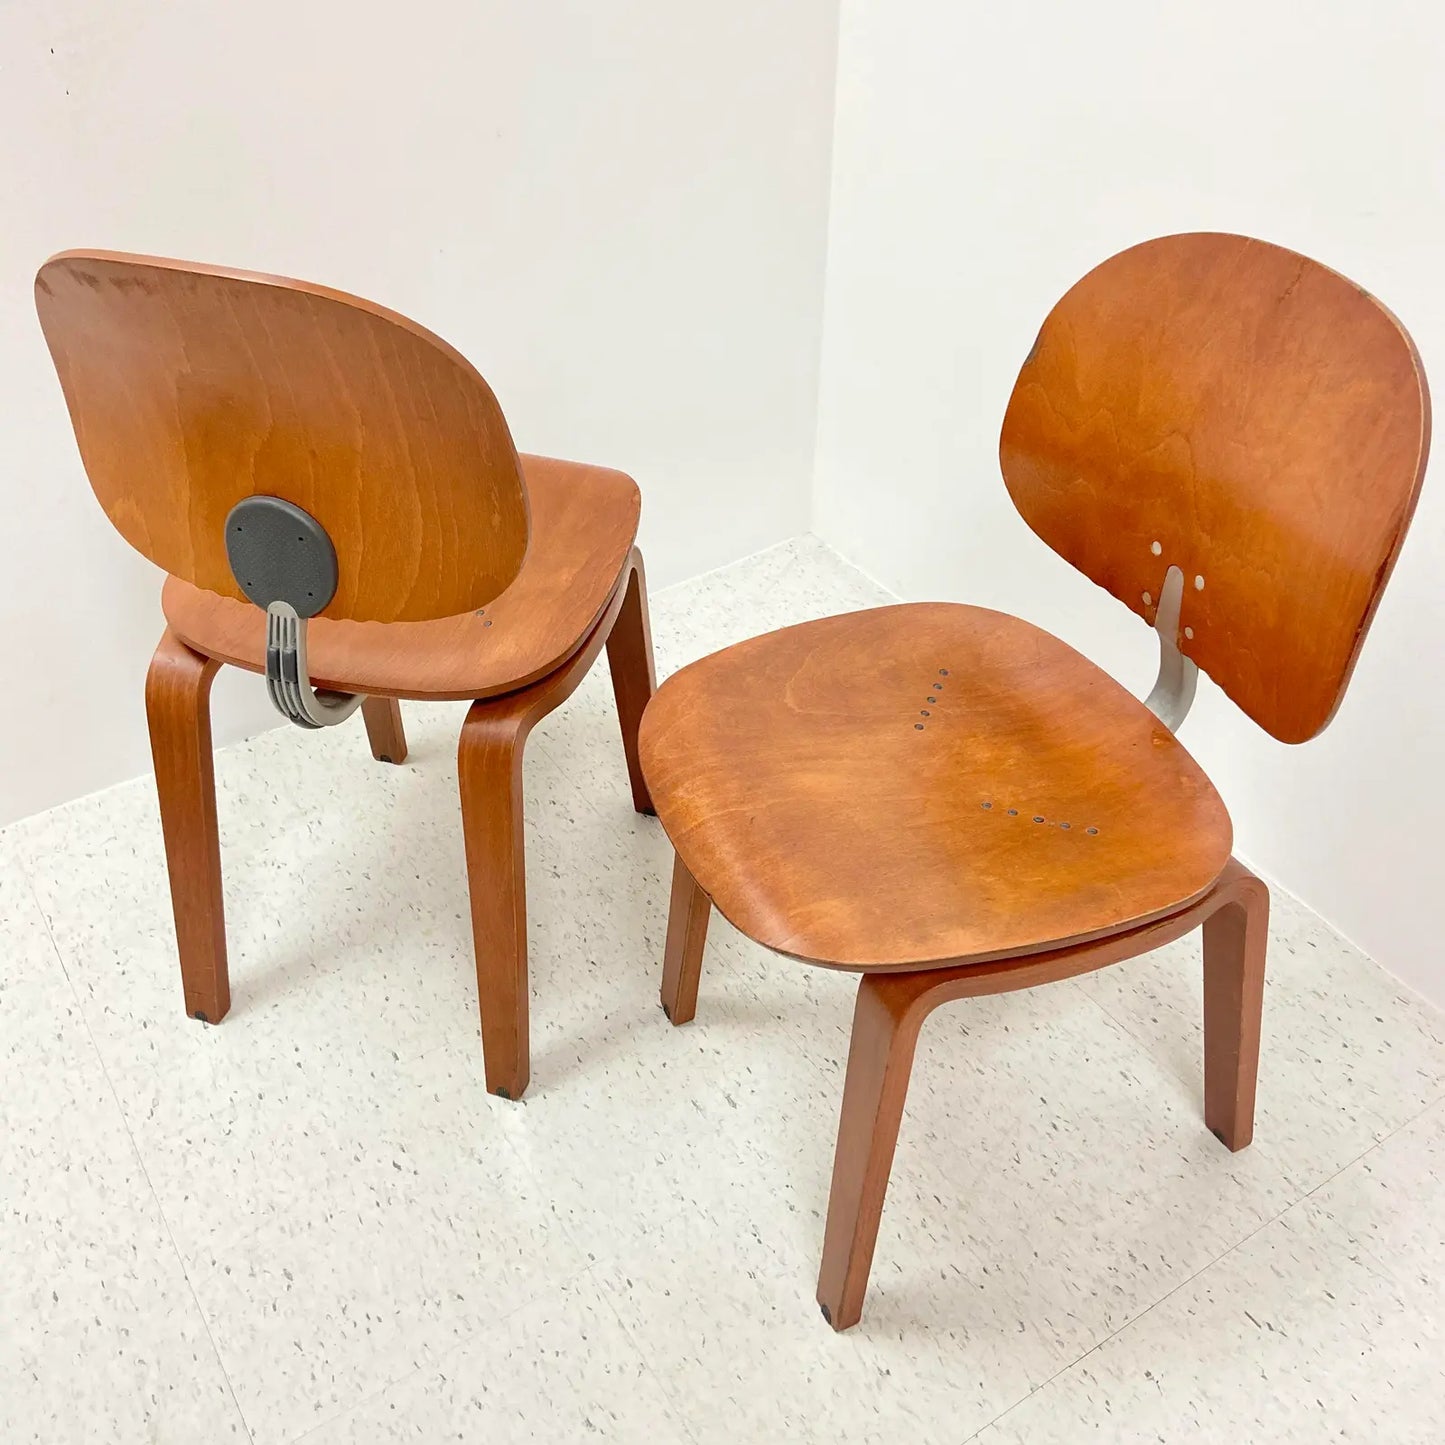 GIANCARLO PIRETTI BENTWOOD CYLON CHAIRS FOR KREUGER - A PAIR